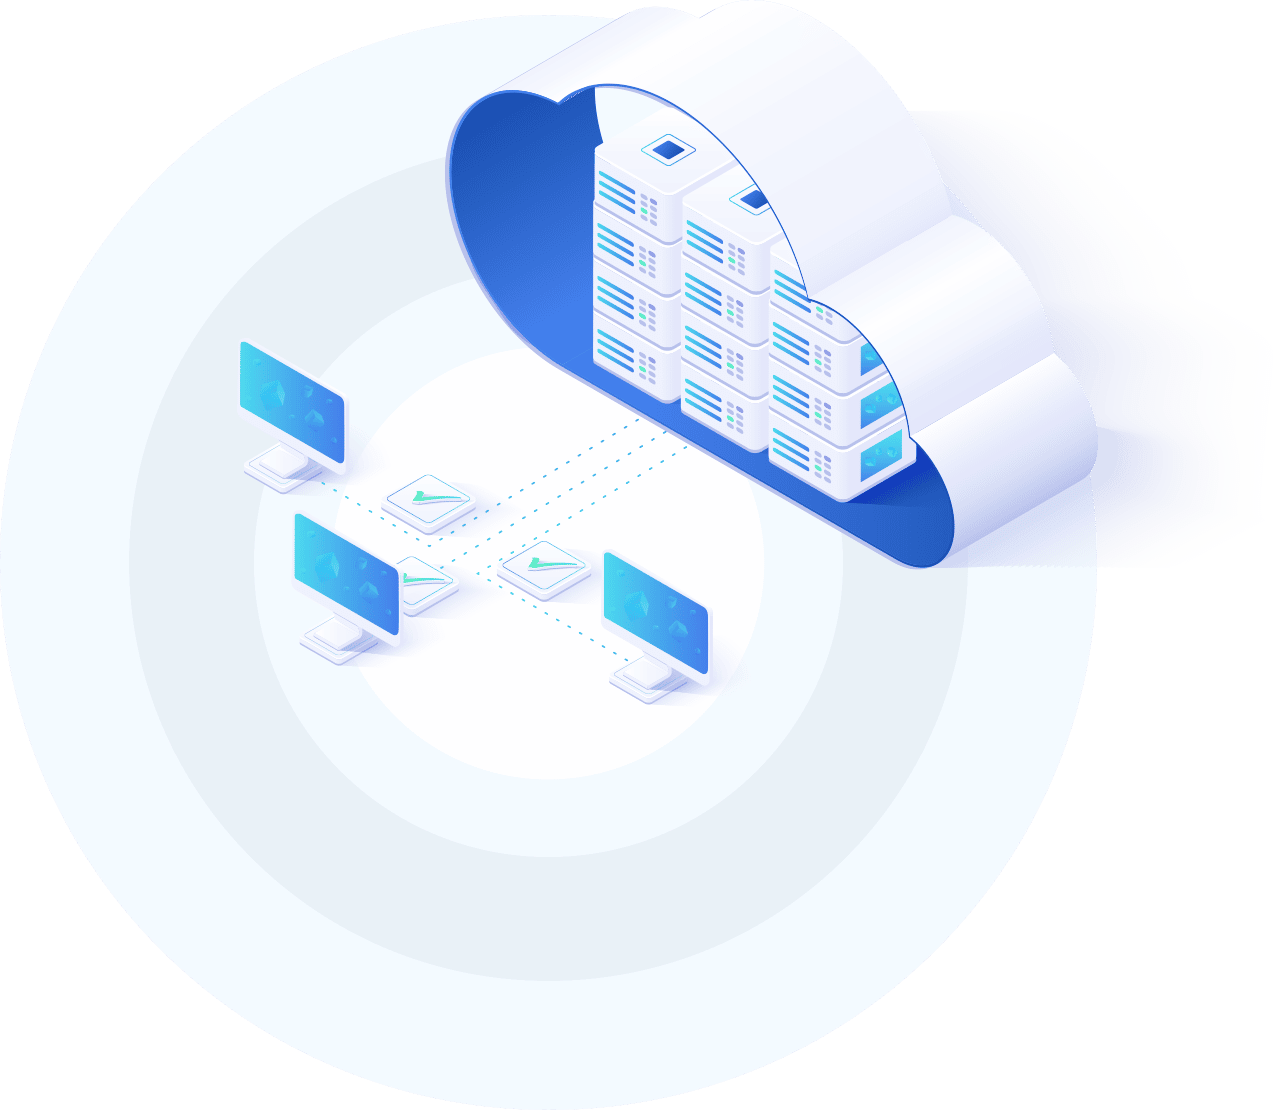 Why Choose Our Cloud Services